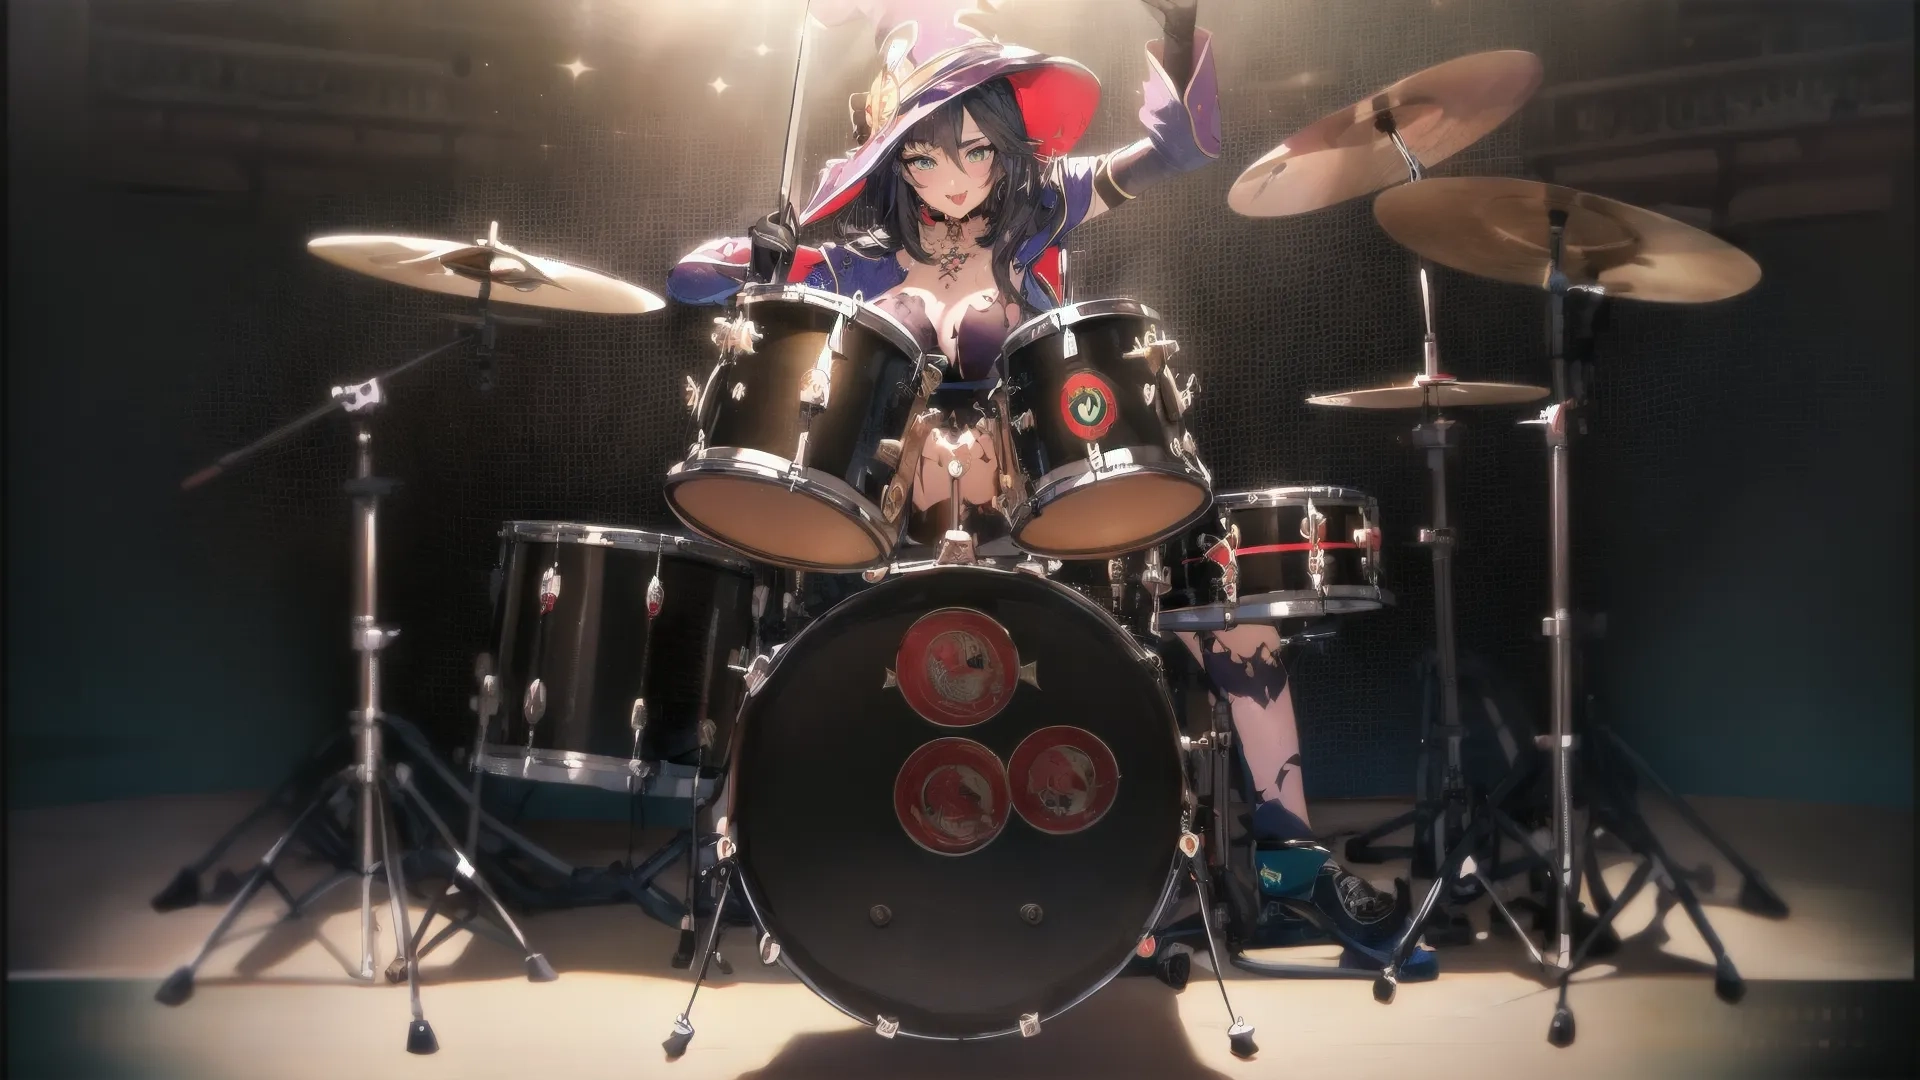 a young asian woman on her drums set with lights above her head and two drums behind her, in a studio setting, in front of drum equipment
